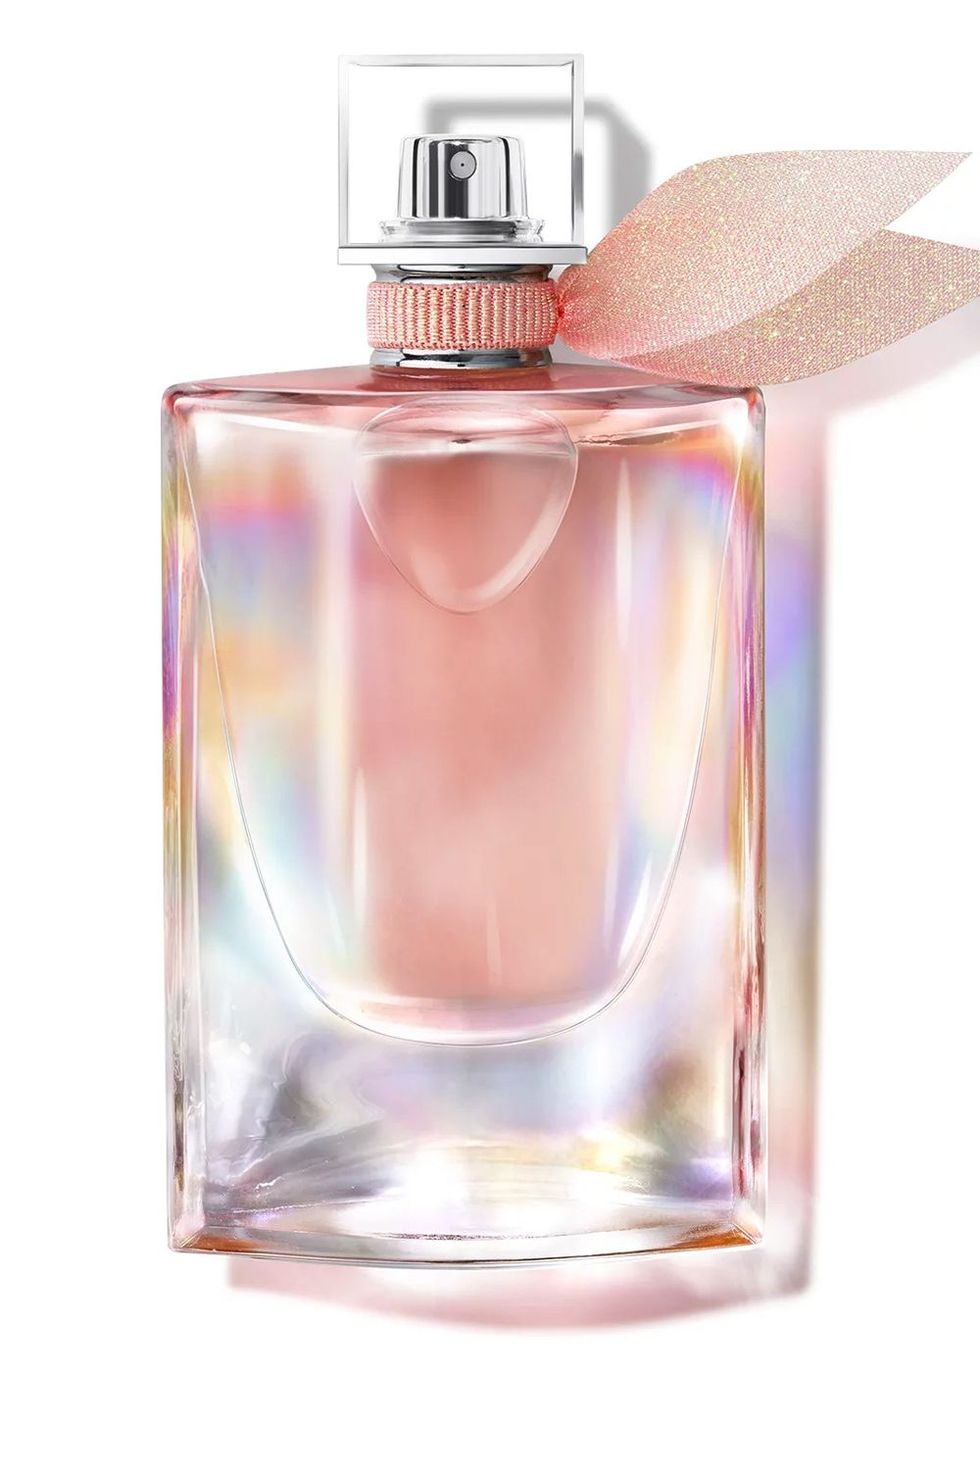 30 Best Summer Scents and Fragrances for 2022